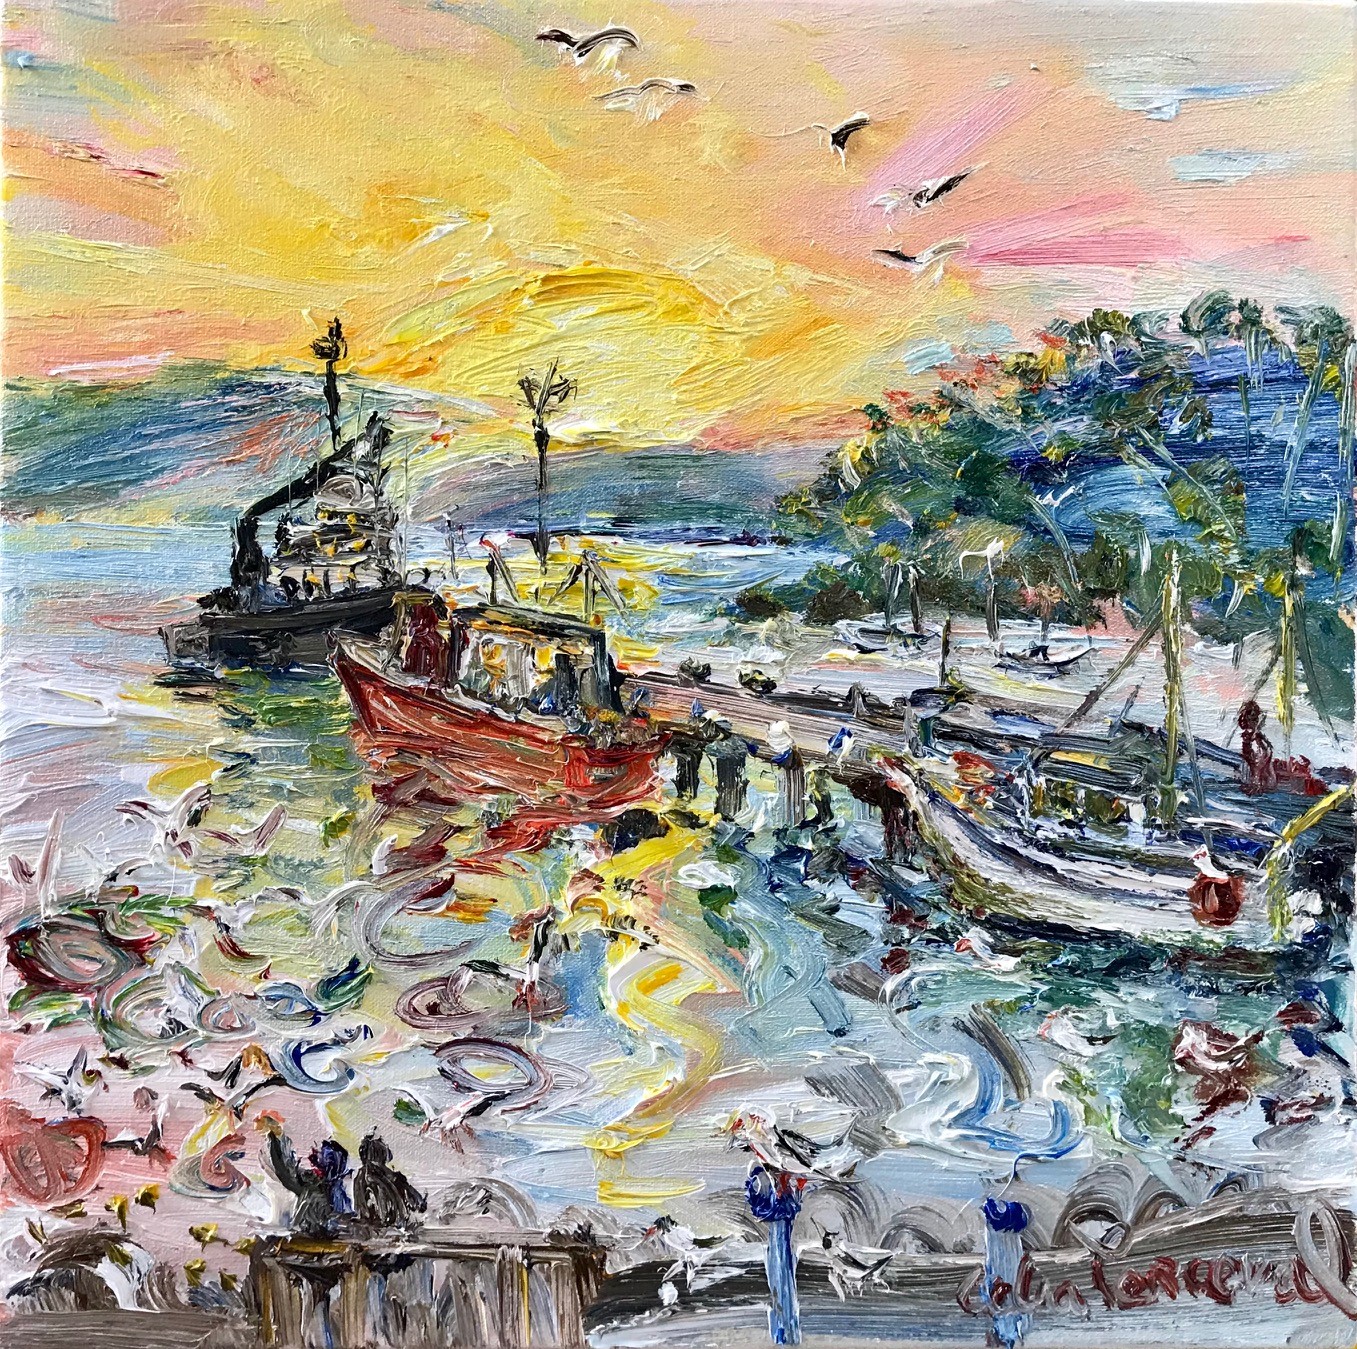 Celia Perceval Feeding the Seagulls at Sunset Over the Bay oil n canvas 40 x 40cm